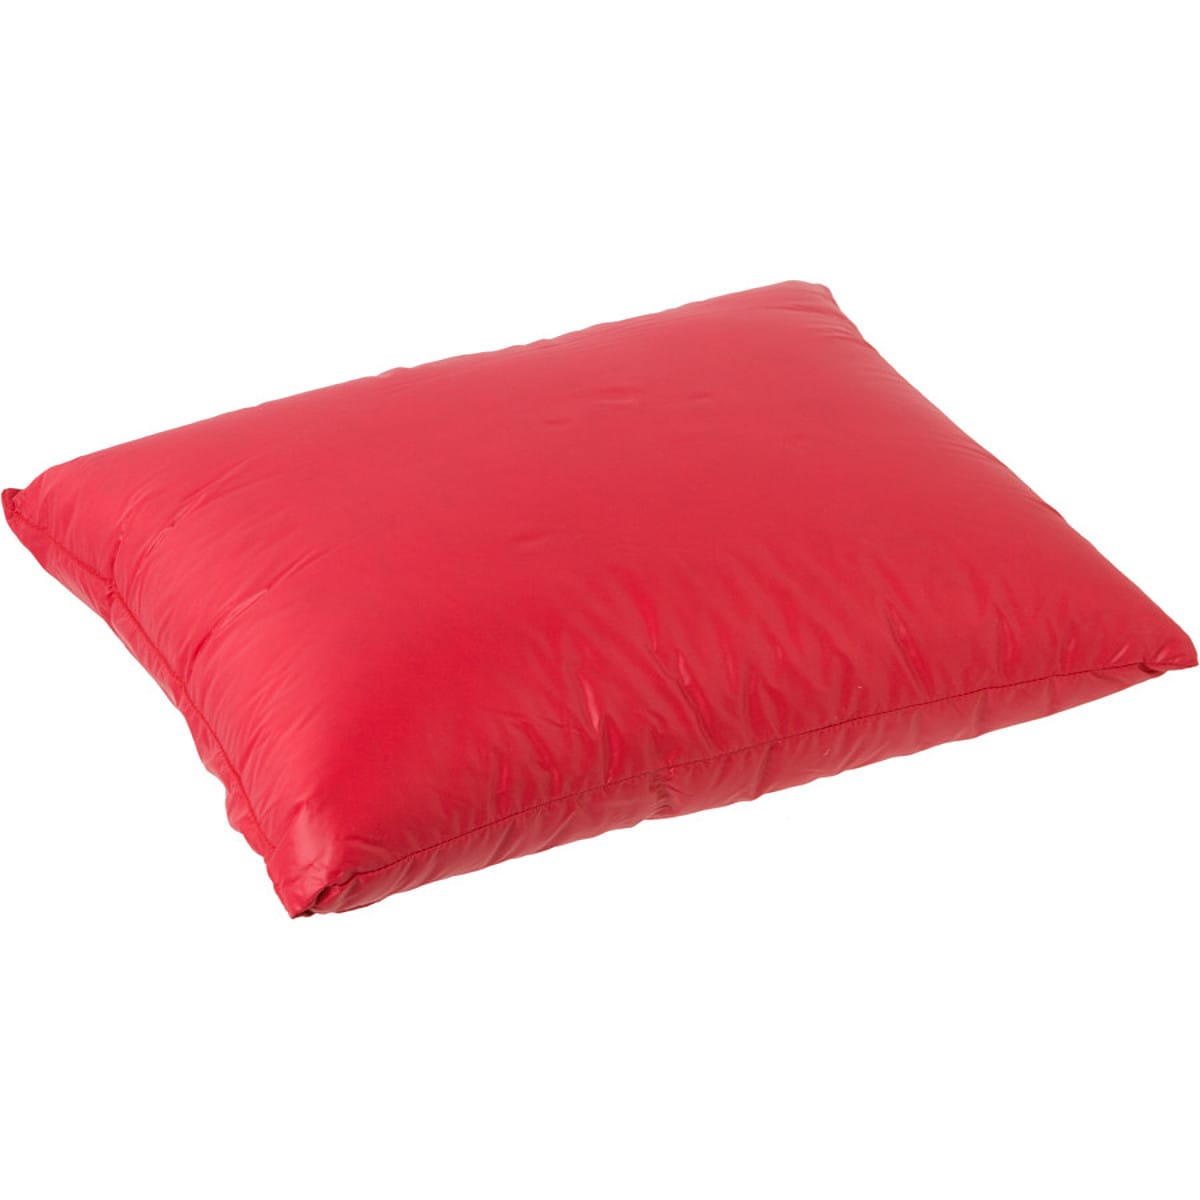 Western Mountaineering Cloudrest Down Pillow Red, One Size